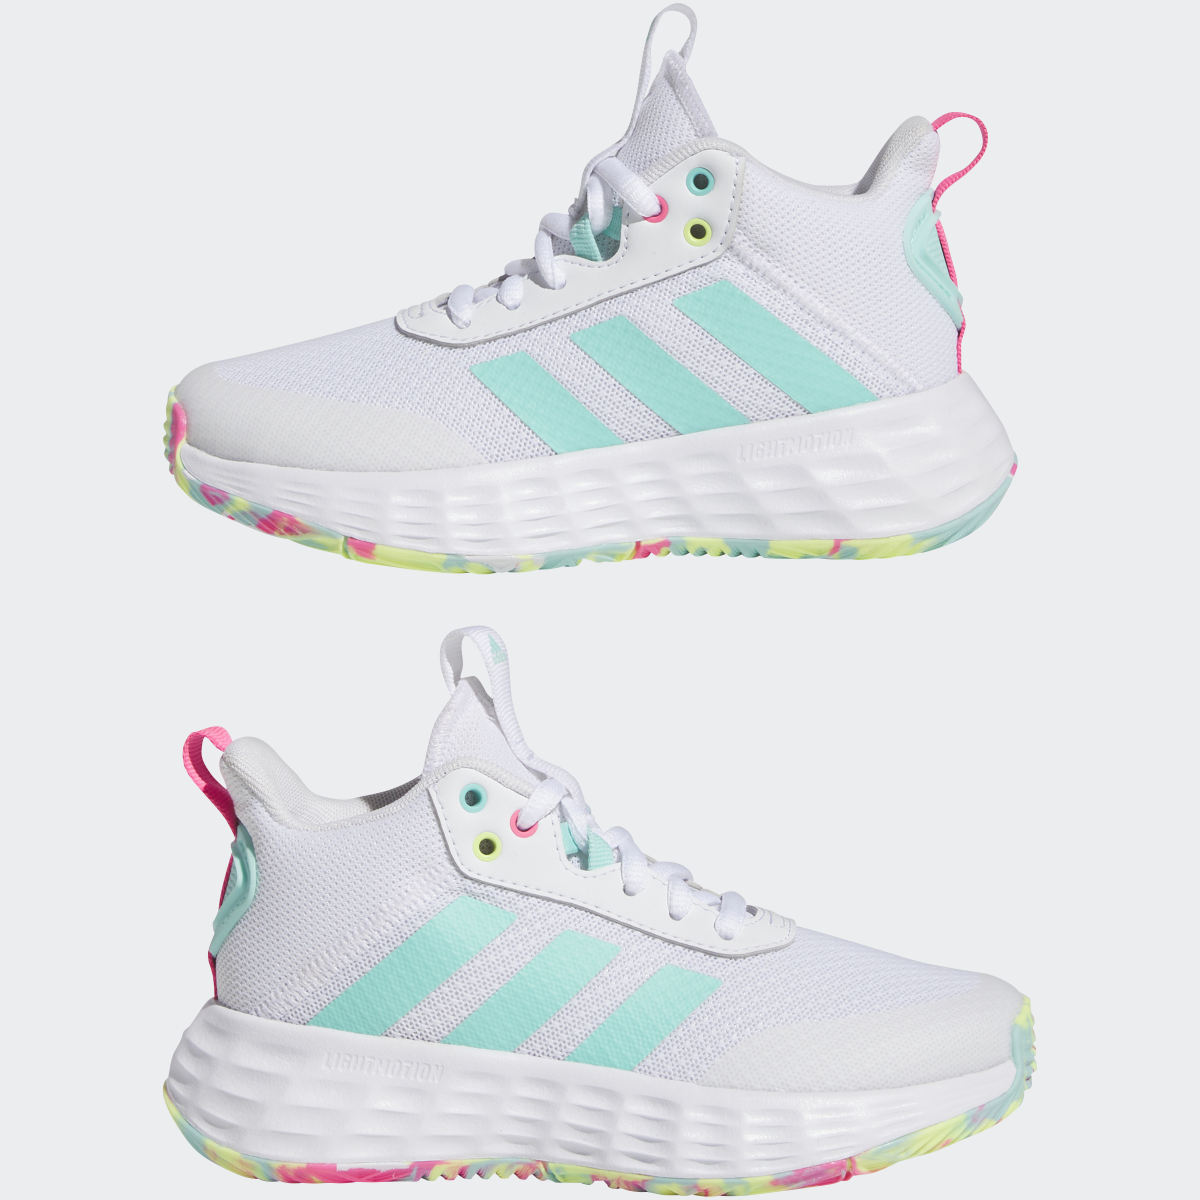 Adidas Ownthegame 2.0 Shoes. 8